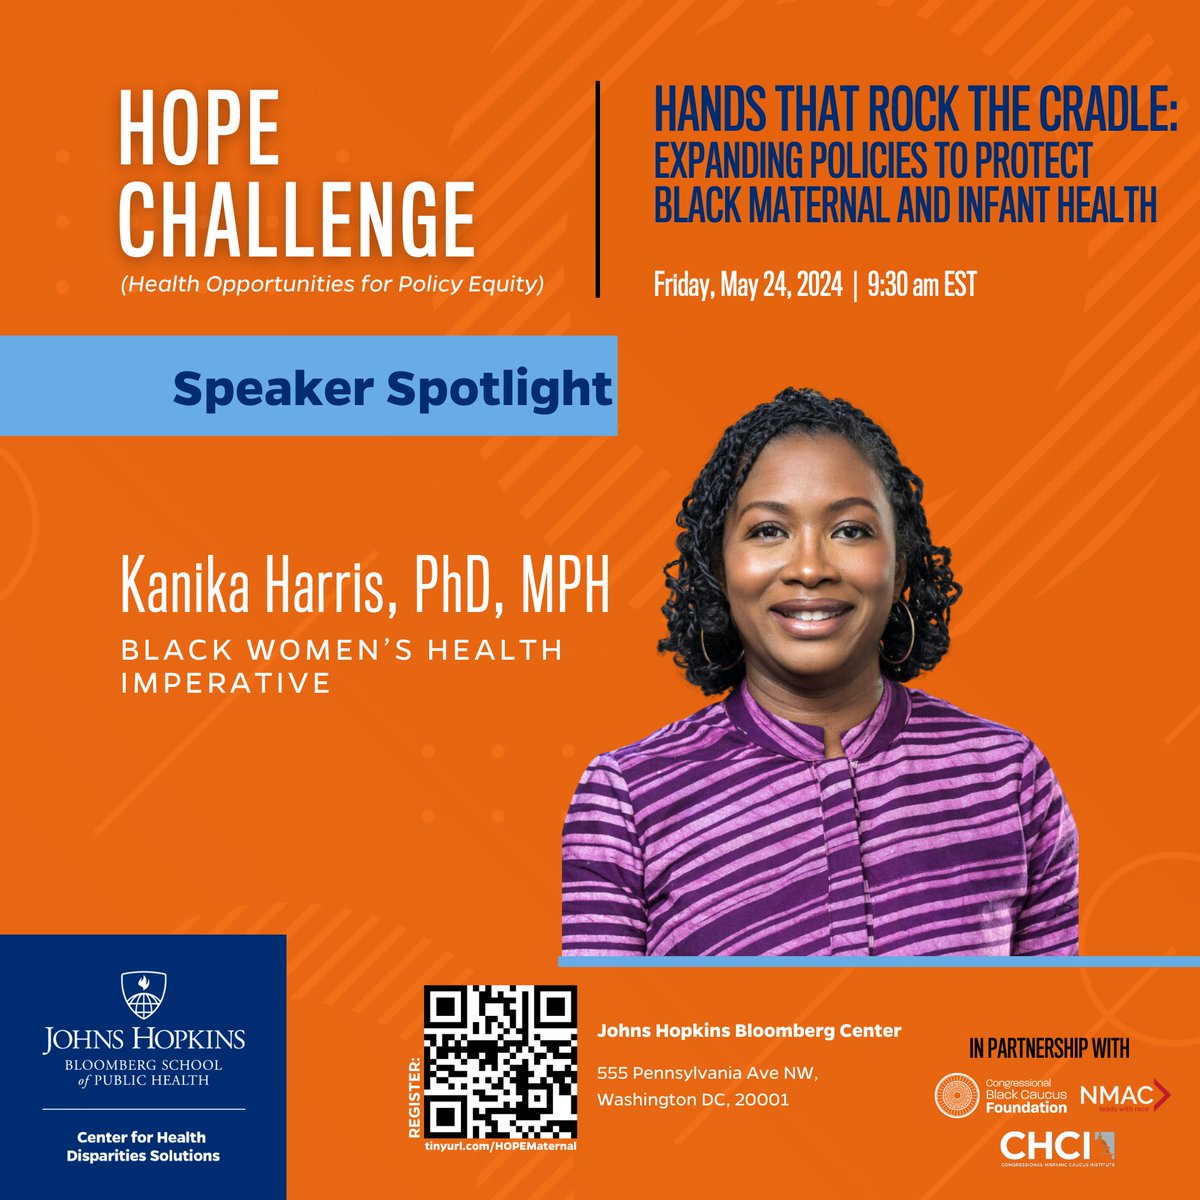 Dr. Kanika Harris, PhD, MPH: Championing Black Maternal and Child Health 🌸' In her role at the Black Women's Health Imperative, Dr. Harris is at the forefront of addressing health inequities most affecting Black women in the US. Register: tinyurl.com/HOPEMaternal